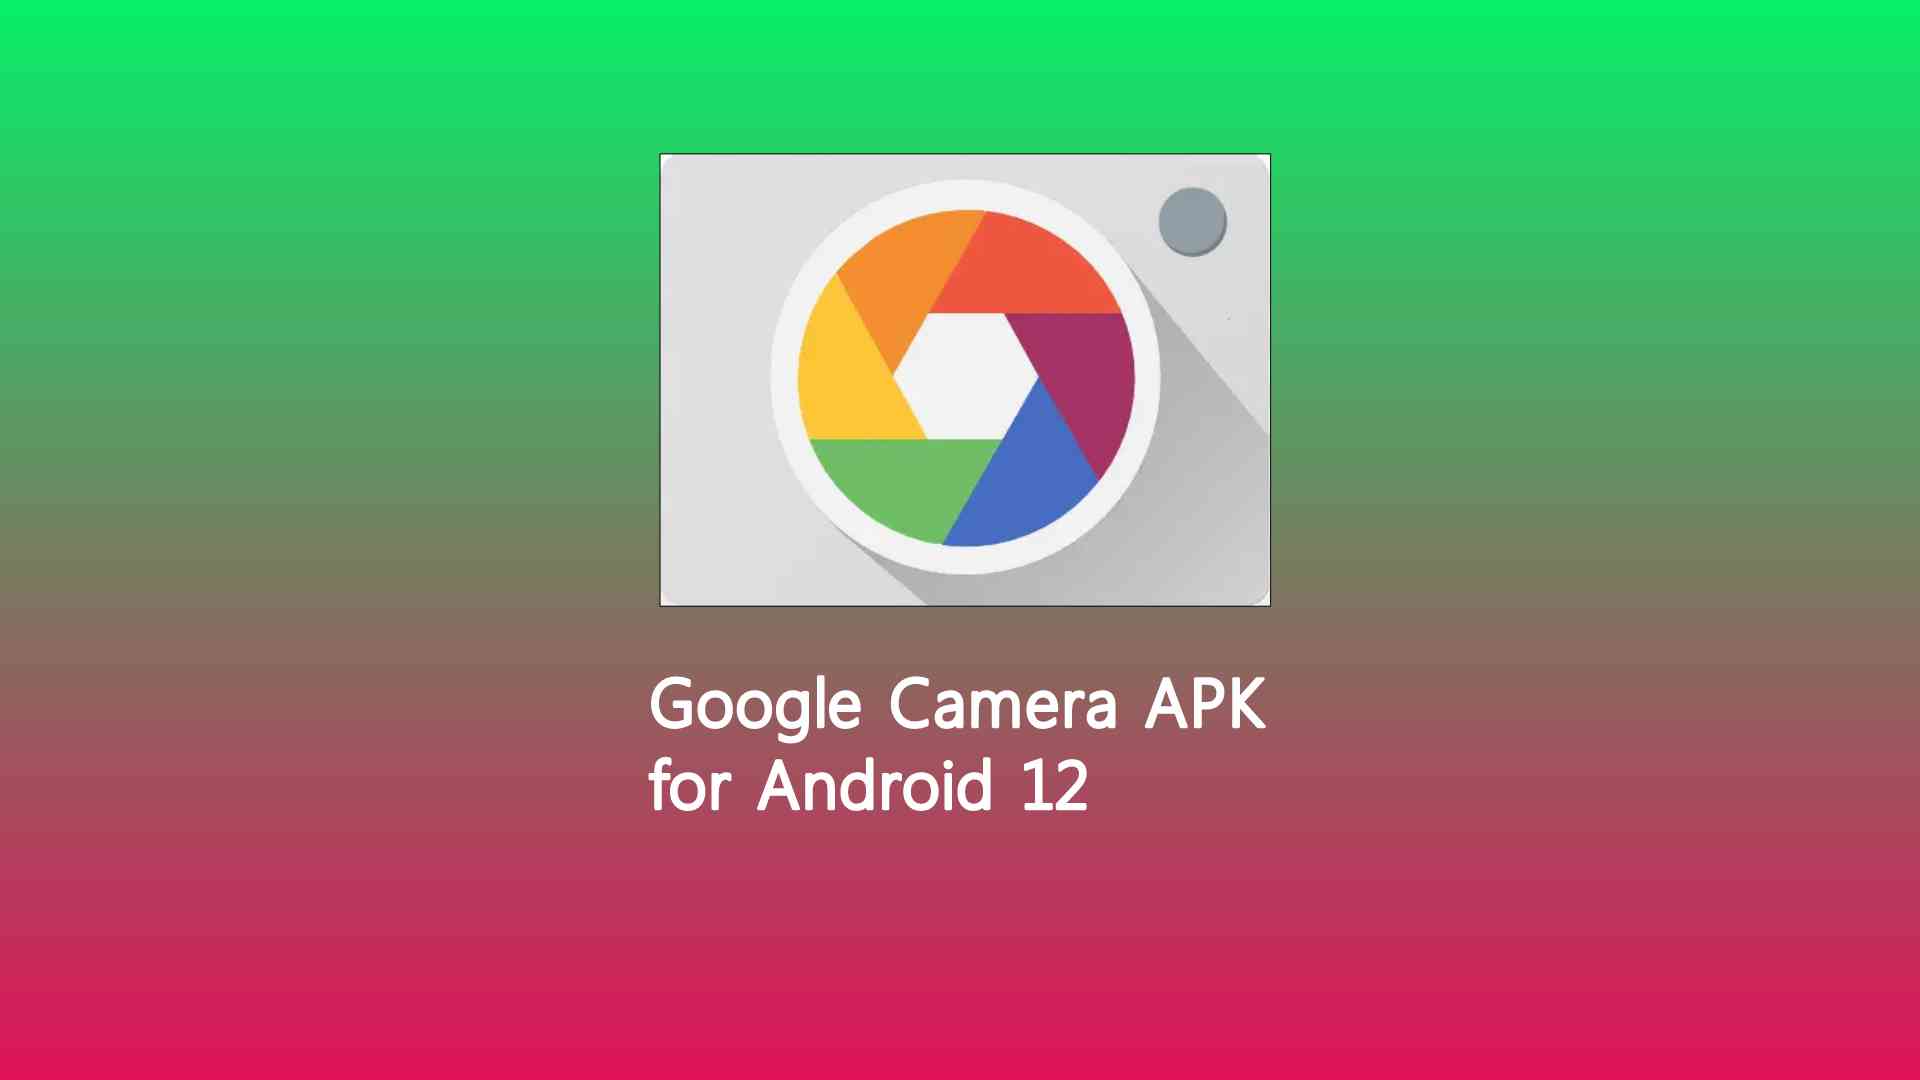 Google Camera APK for Android 12